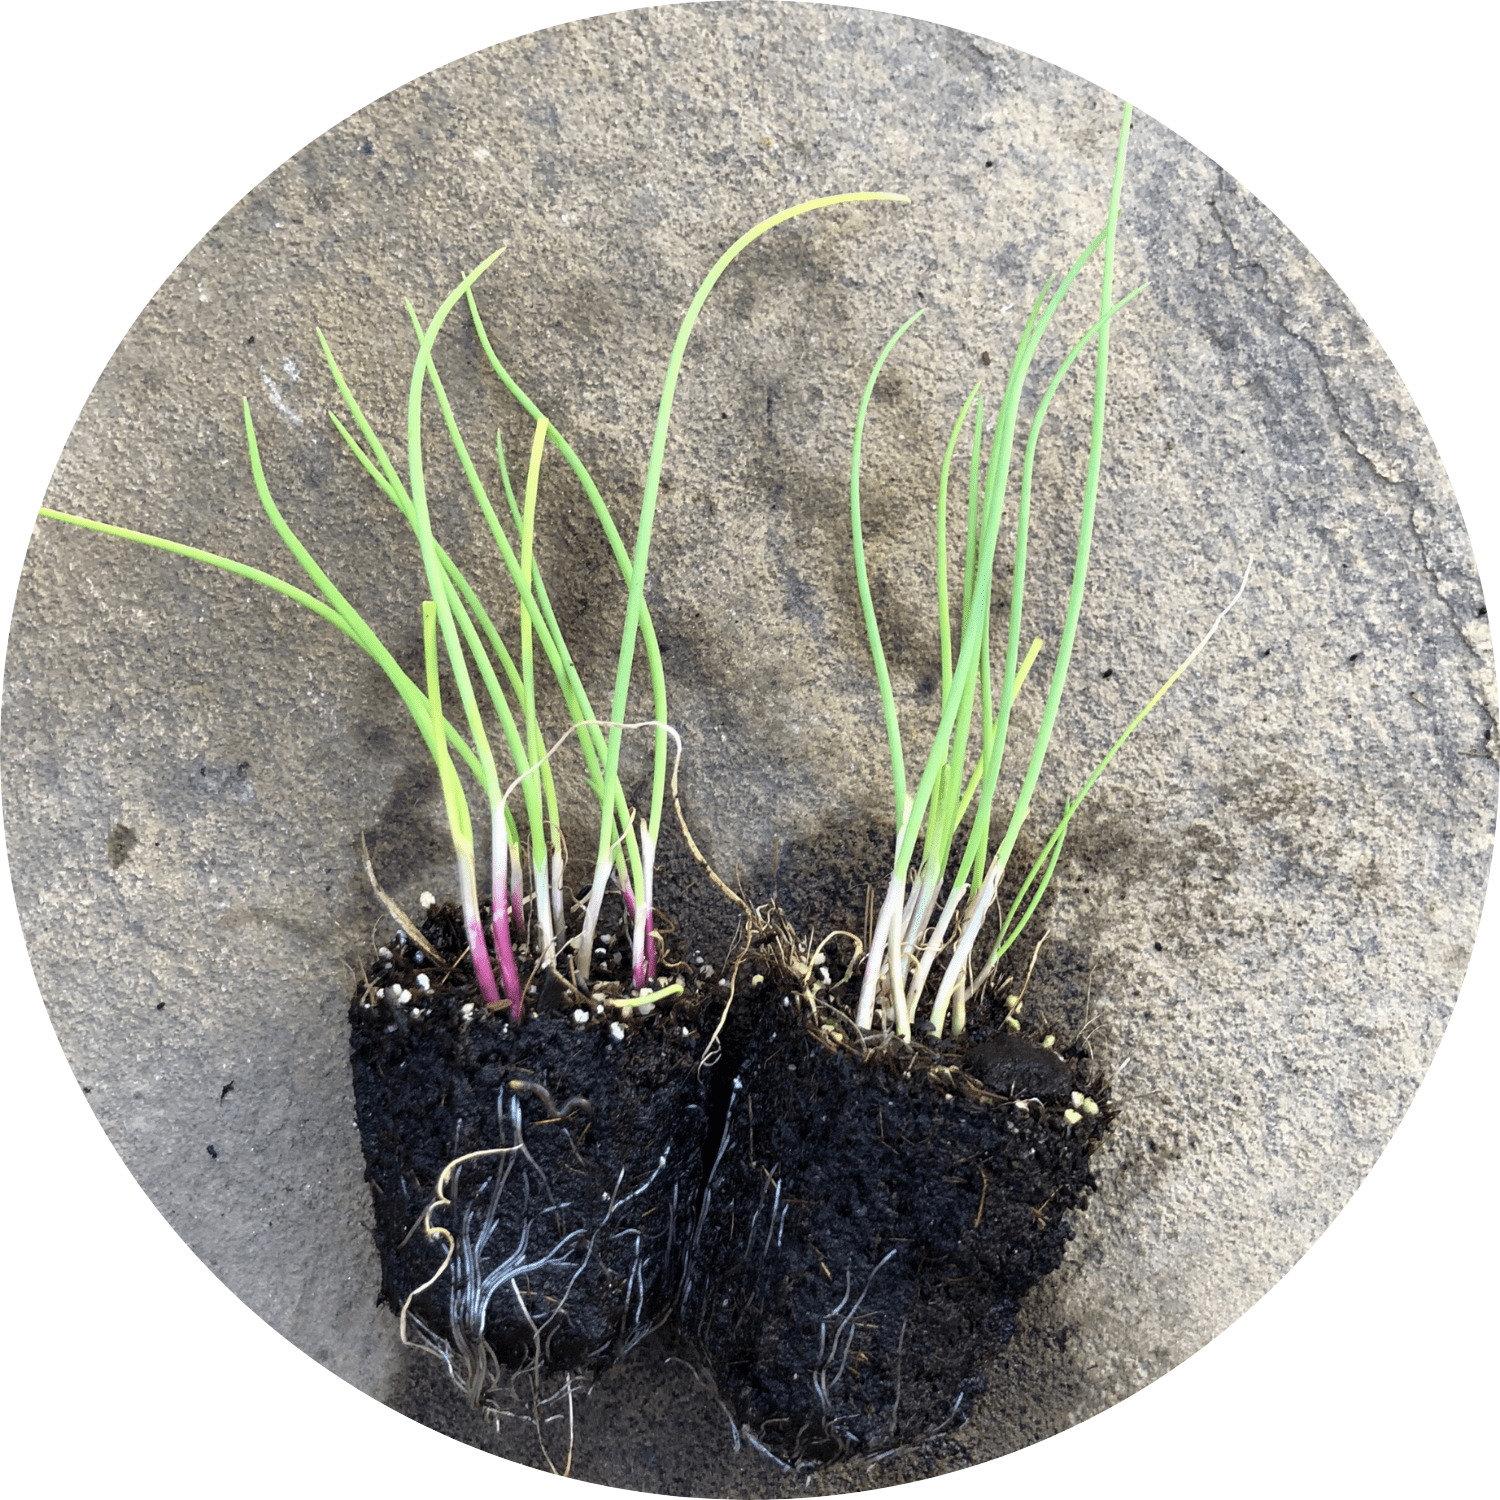 Sprint Scallions – Planted Places